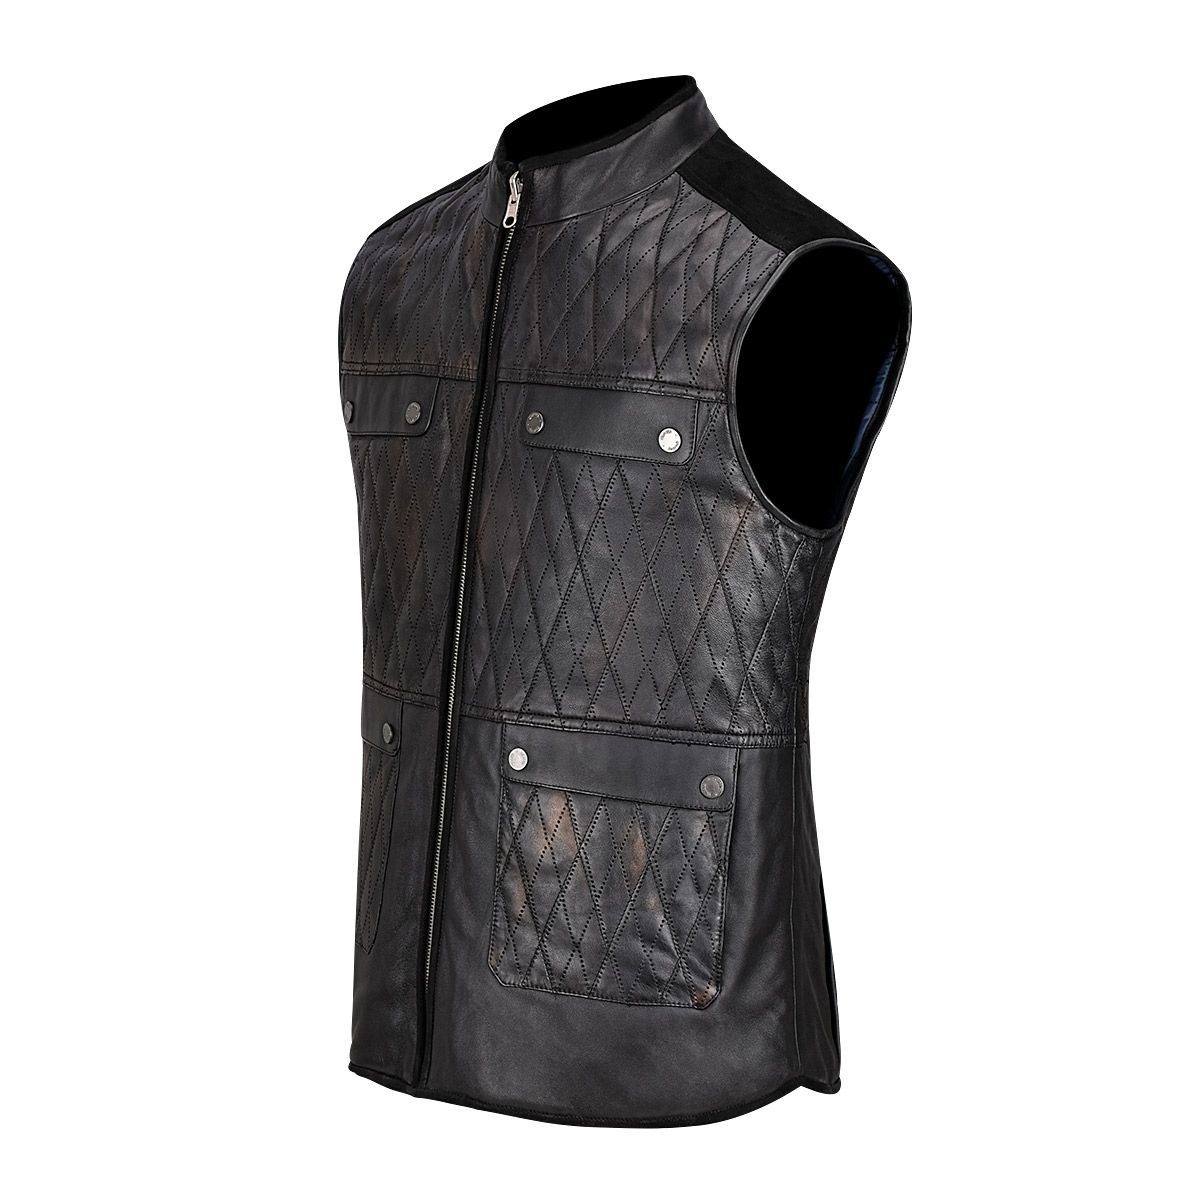 H302BOB- Cuadra black casual fashion reversible lambskin leather vest for men-Kuet.us - Cuadra Boots - Western Cowboy, Casual Fashion and Dress Boots